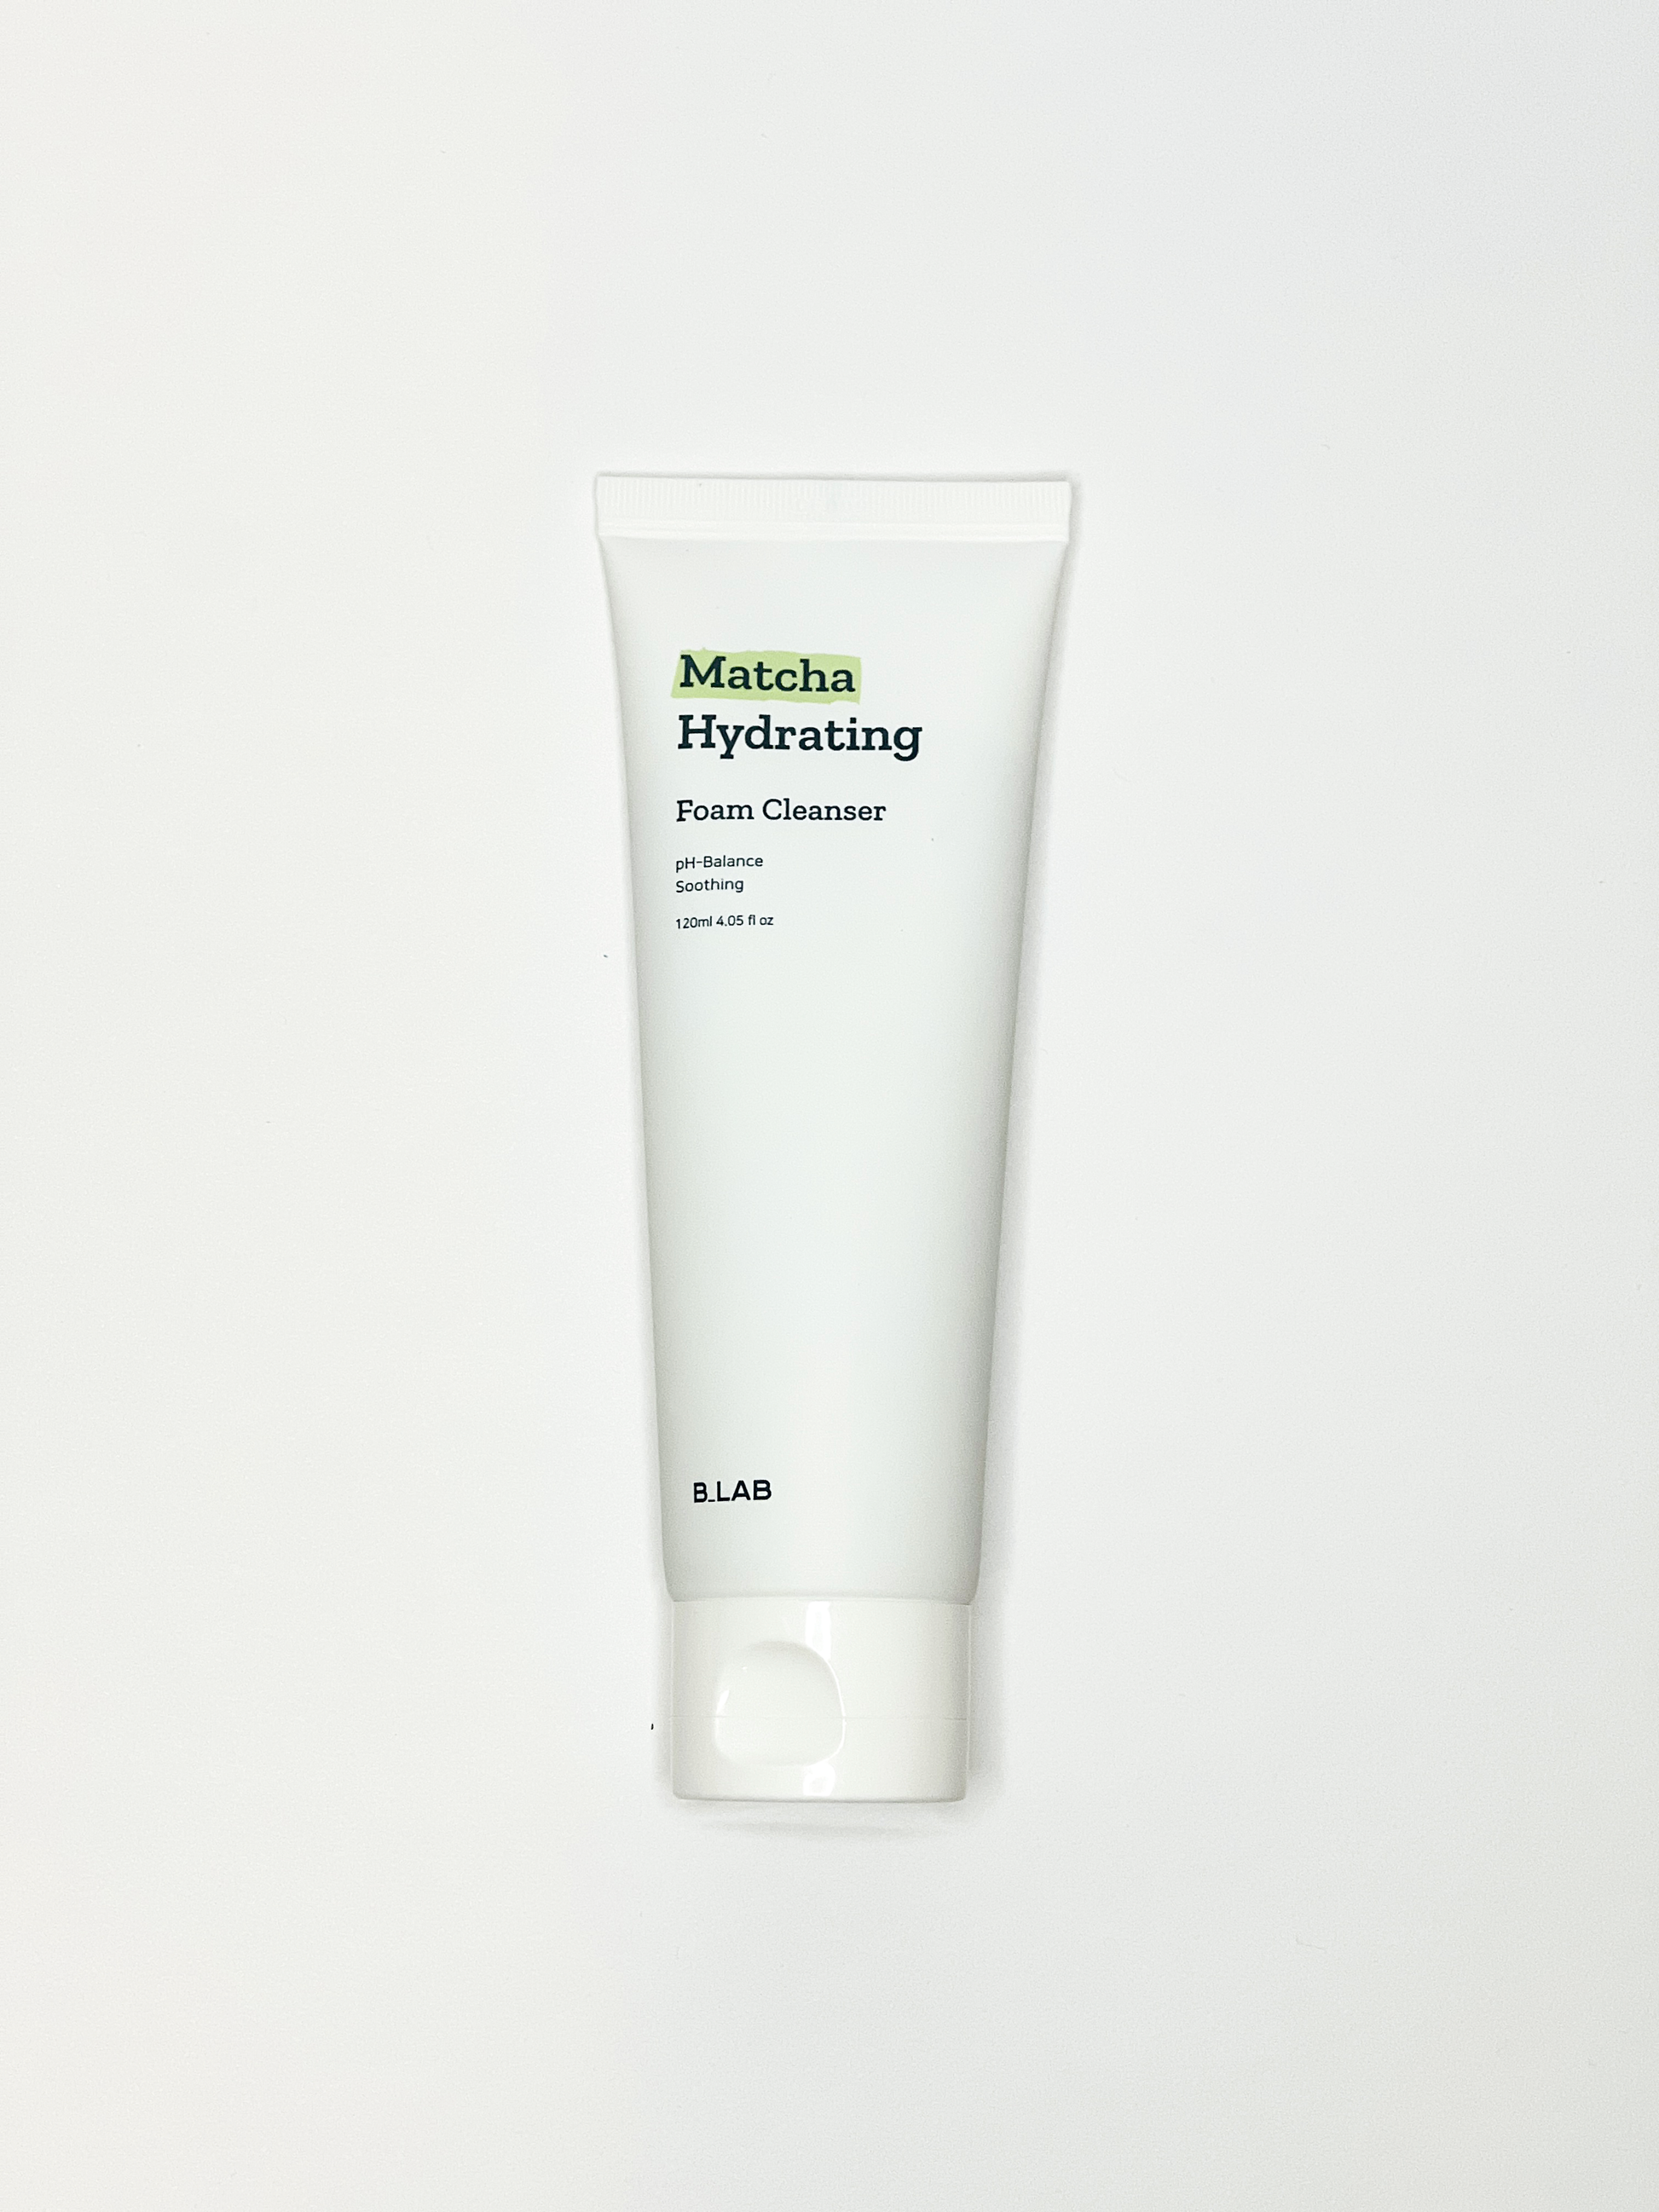 B lab matcha hydrating foam cleanser good for dryness and hydration.